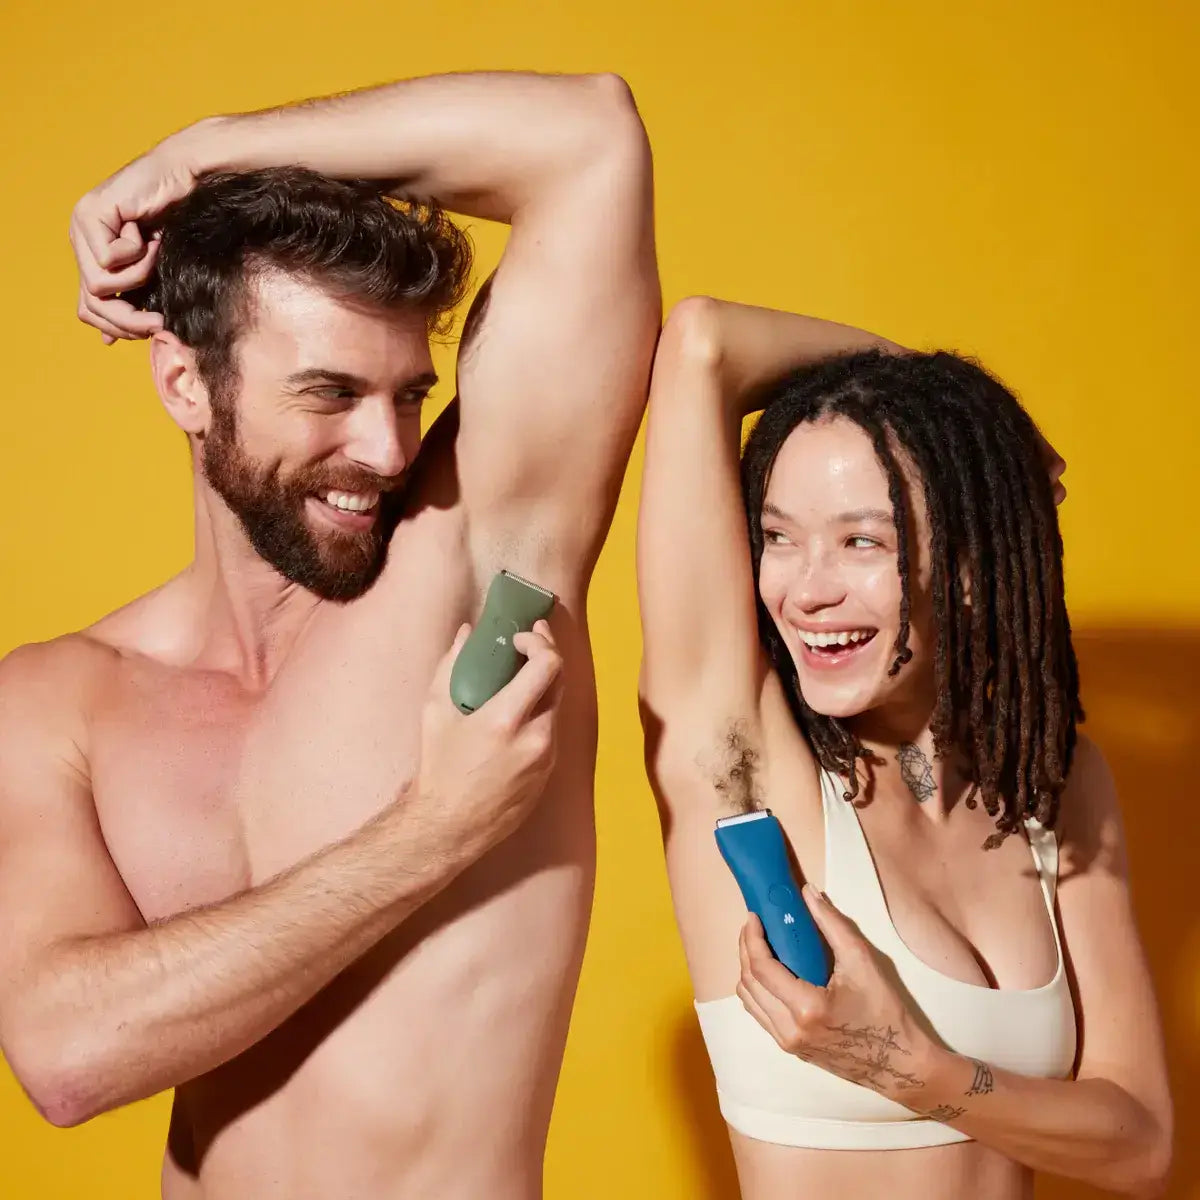 man and woman using body groomer to trim underpit hair